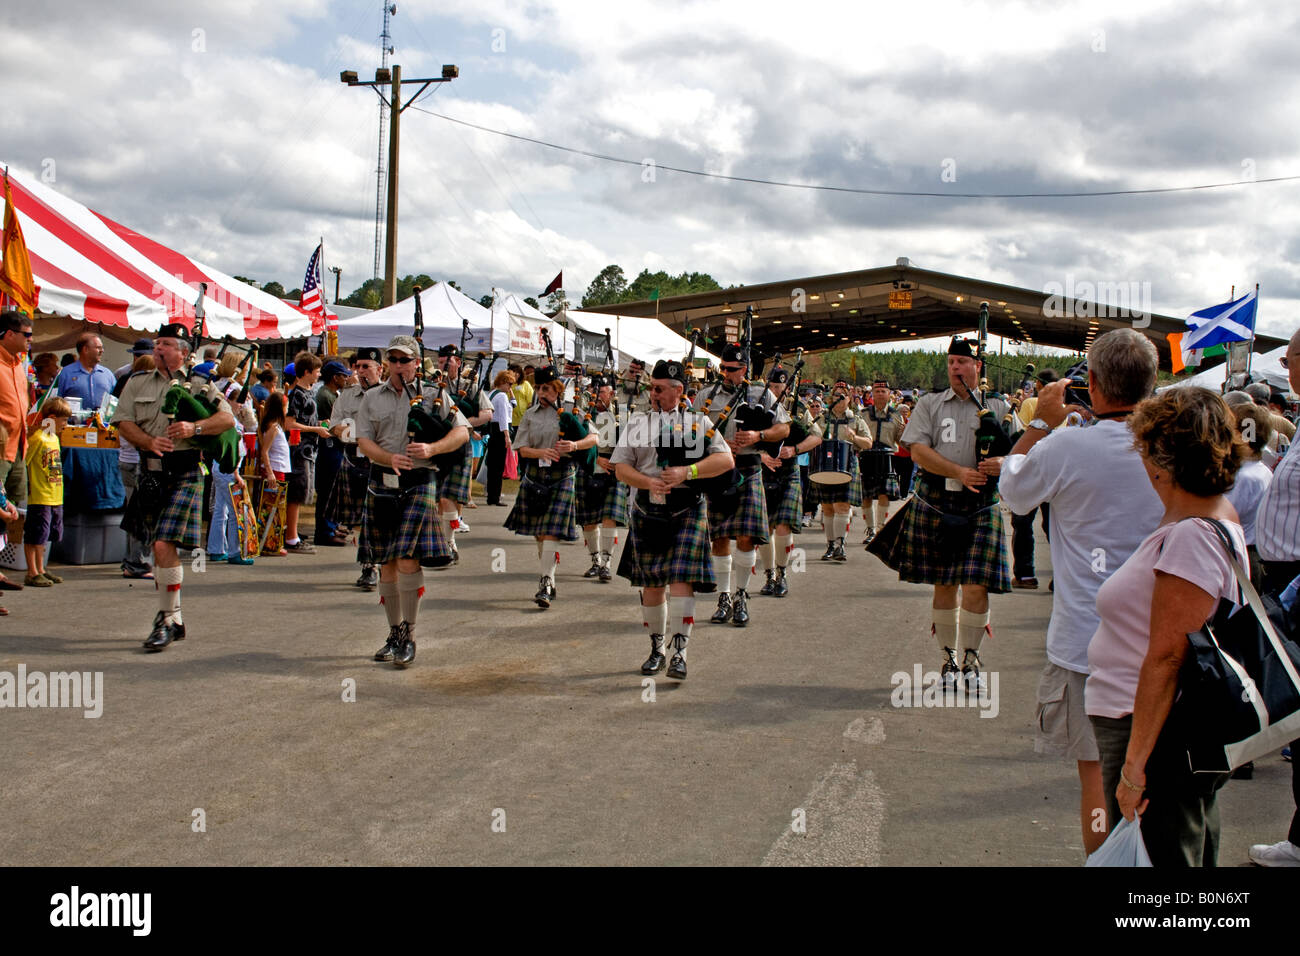 Parade of bagpipers marching on a road at the Clay County Fairgrounds during the Scottish Highland Games Stock Photo